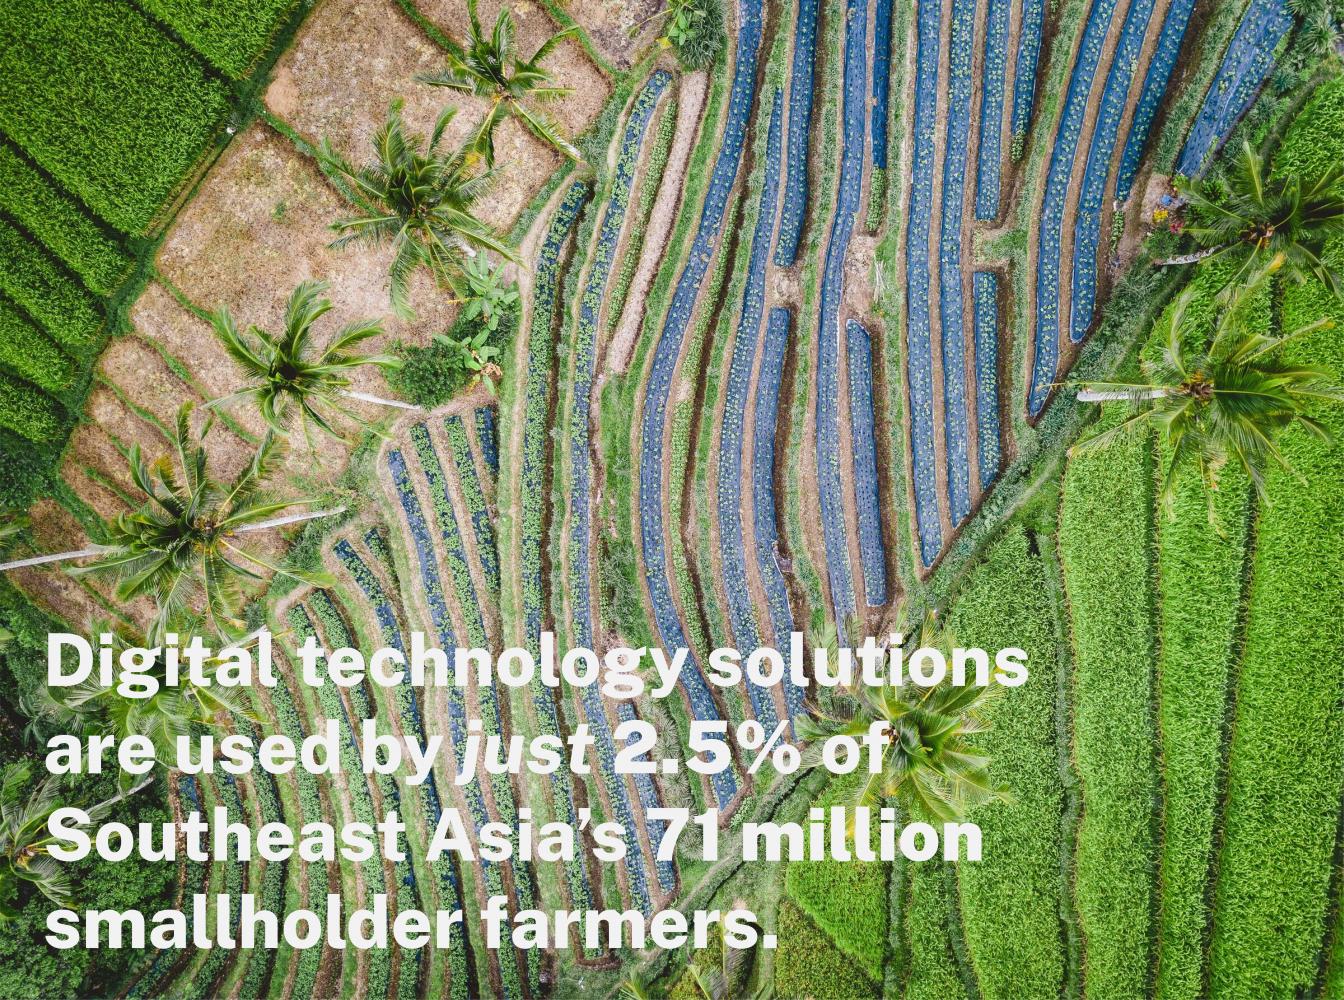 Digital technology solutions are used by just 2.5% of Southeast Asia's 71 million smallholder farmers.